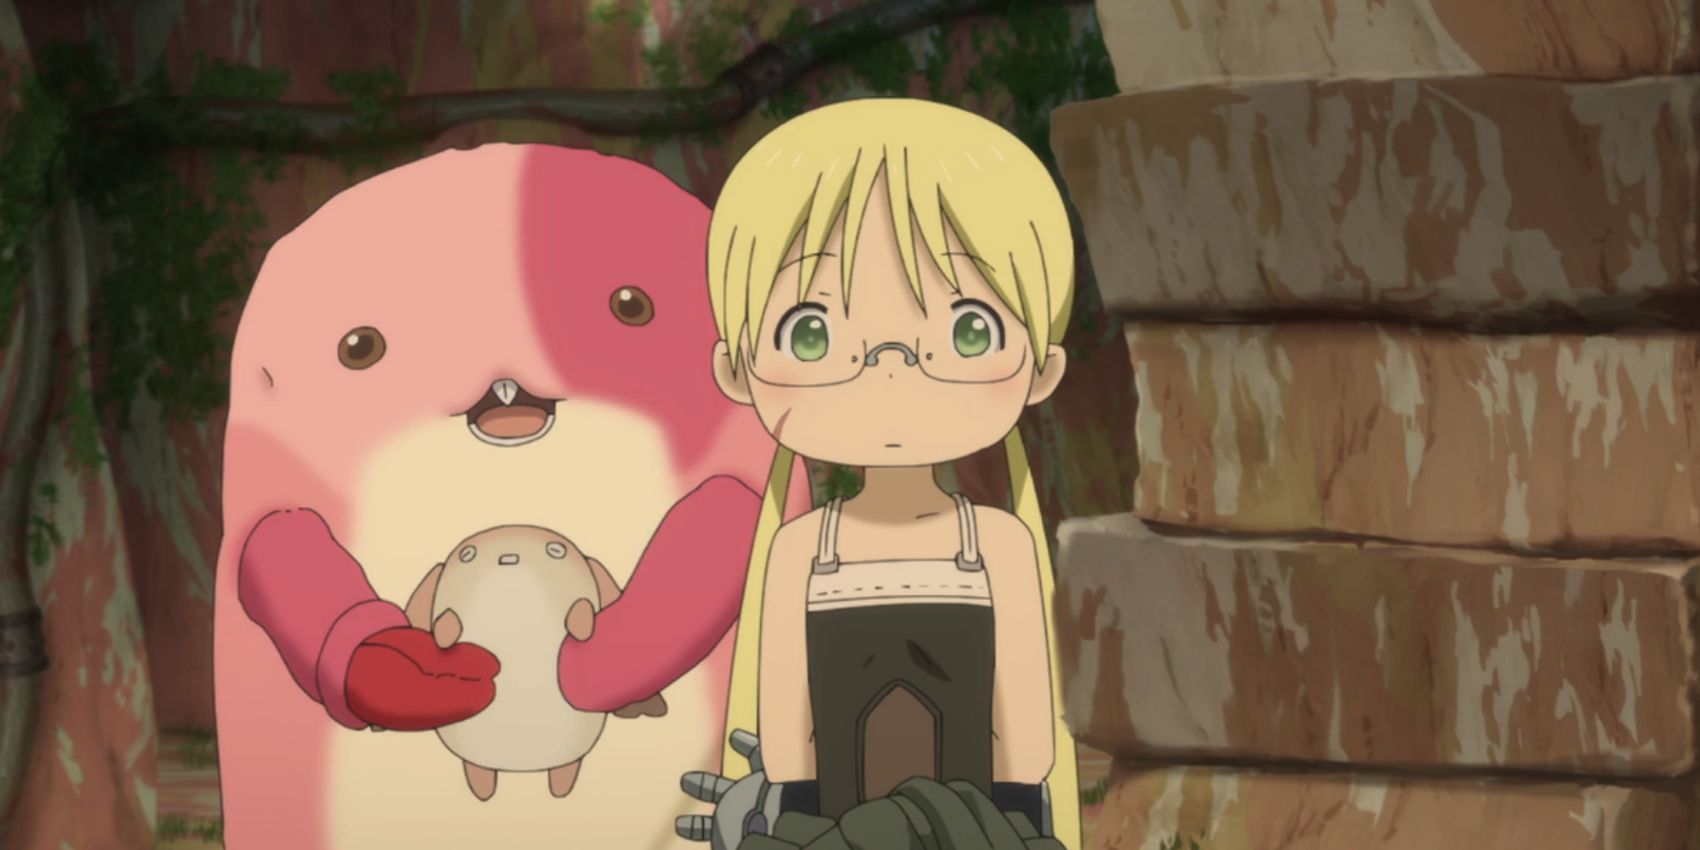 Made in Abyss Season 2 Episode 4 Review - Reg meets Faputa, Maaa saves Riko  from the Hollows